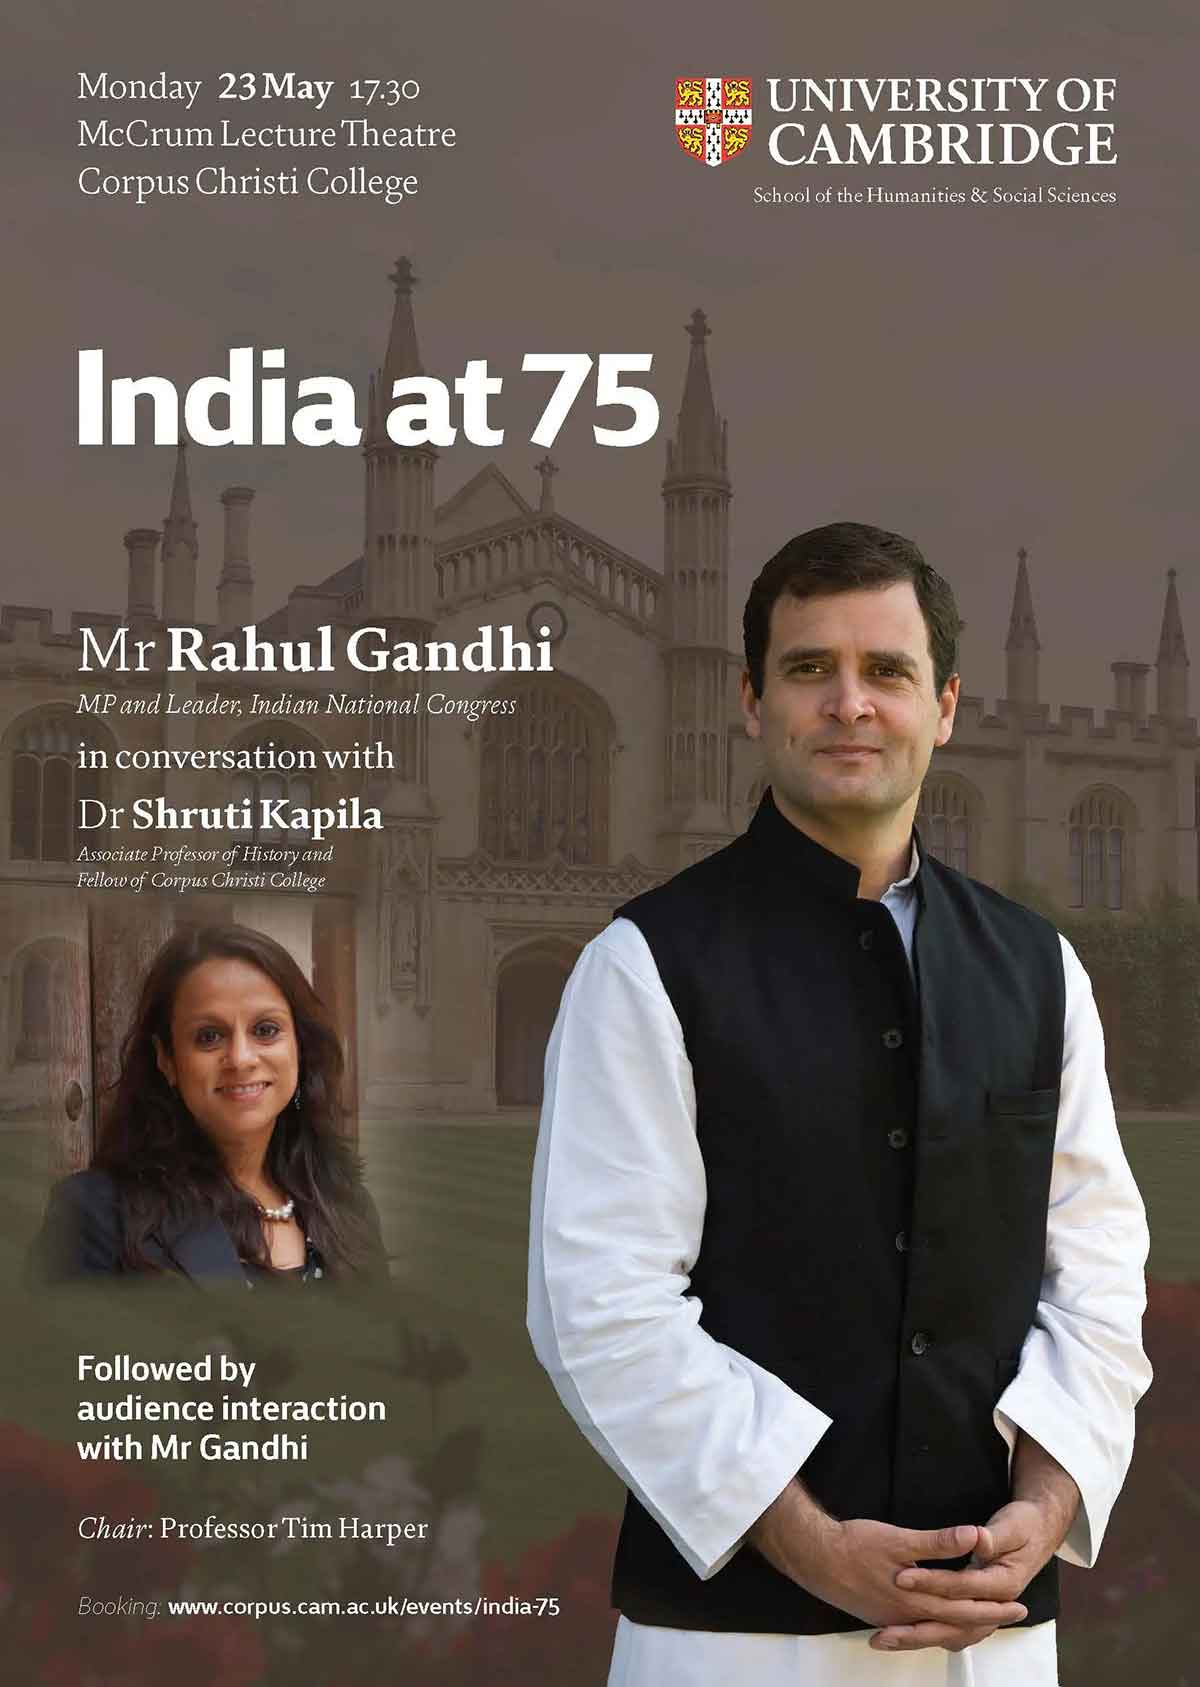 Poster of the event floated by Congress - Cambridge University